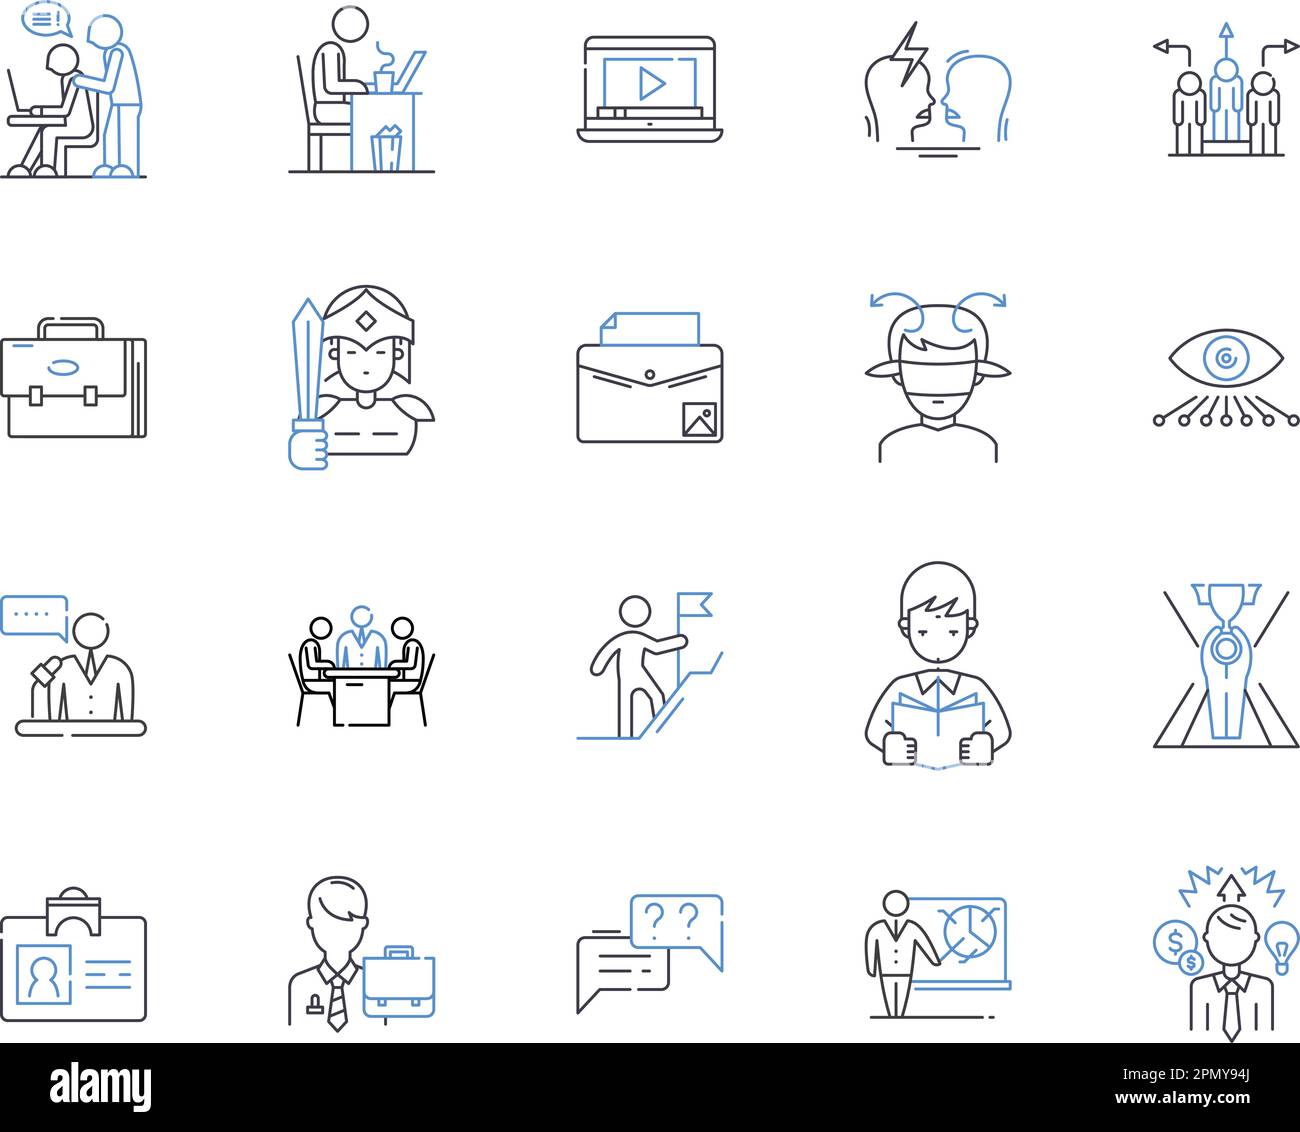 Customer service outline icons collection. customer service, care, assistance, help, support, aid, solutions vector and illustration concept set Stock Vector